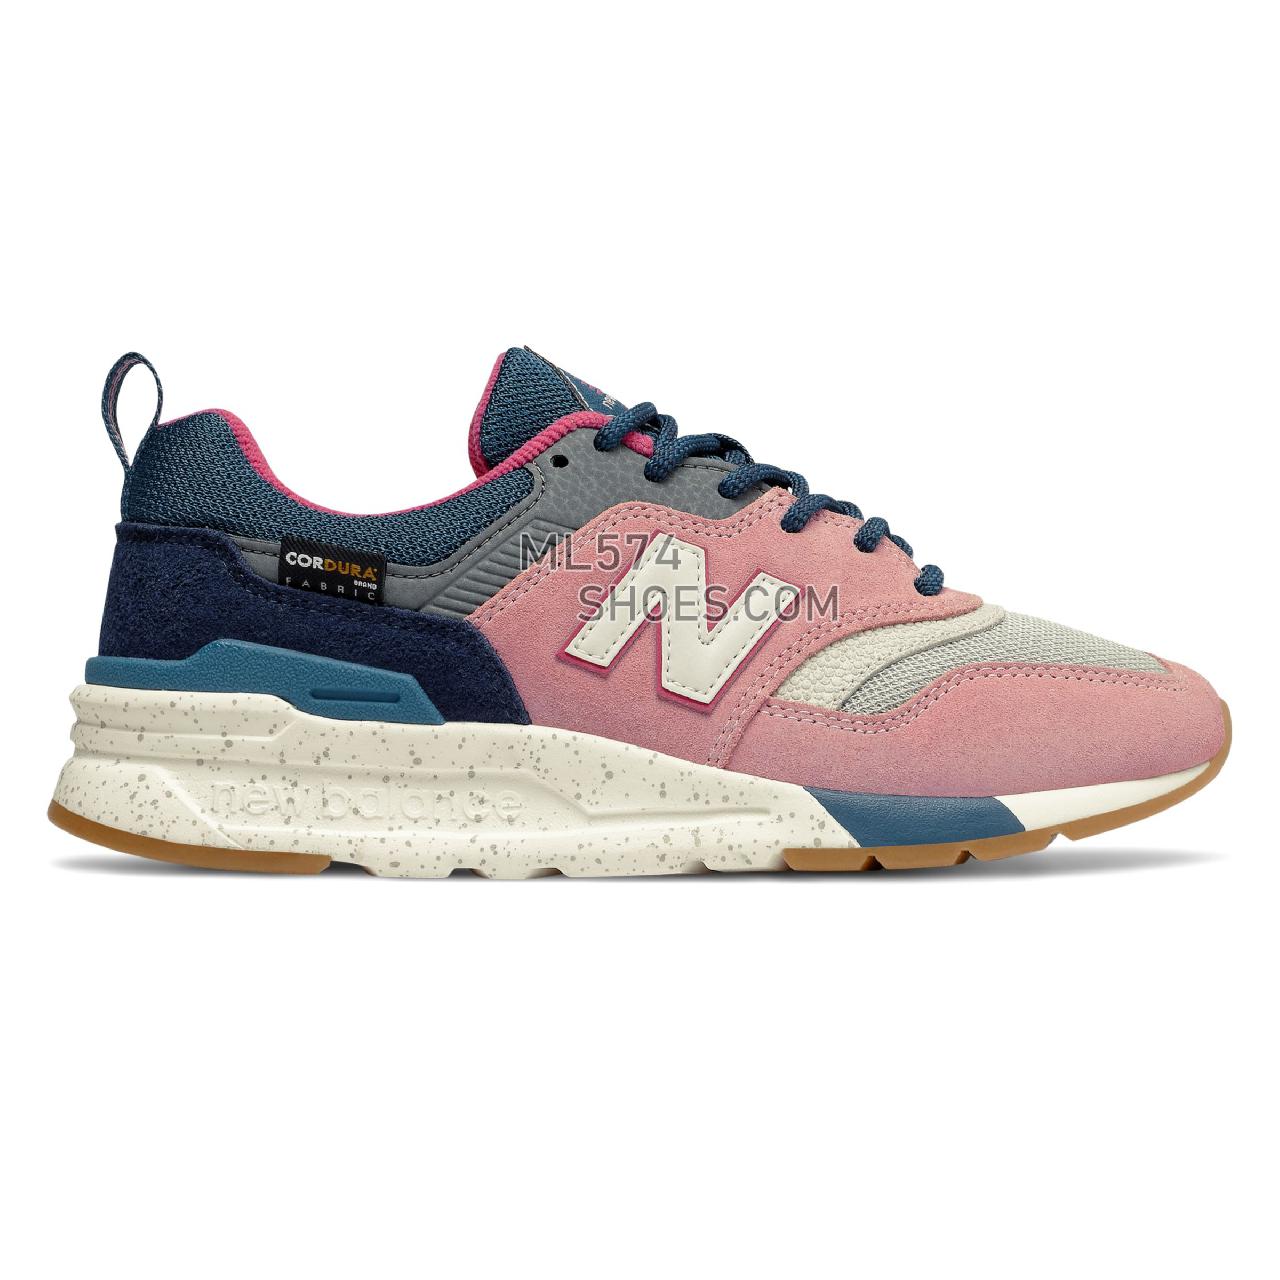 New Balance 997H - Women's Classic Sneakers - Overcast with White Oak - CW997HXF